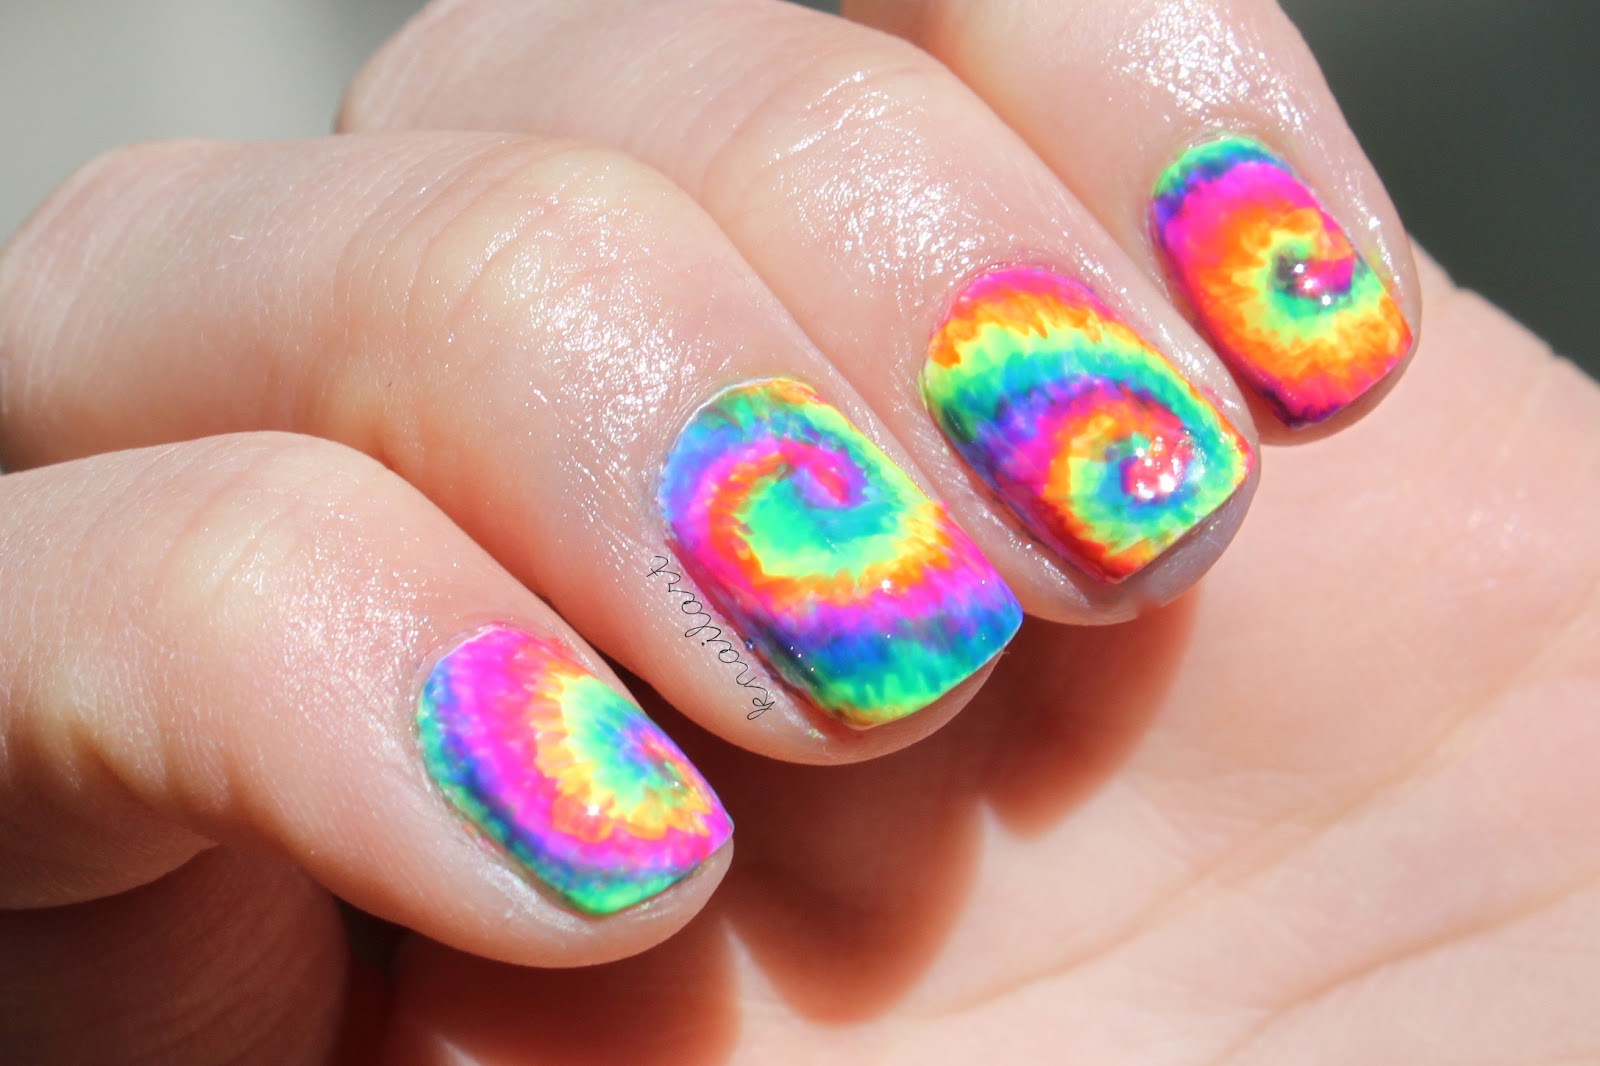 Colorful Marbled Nail Art Designs You Can Do at Home - wide 9